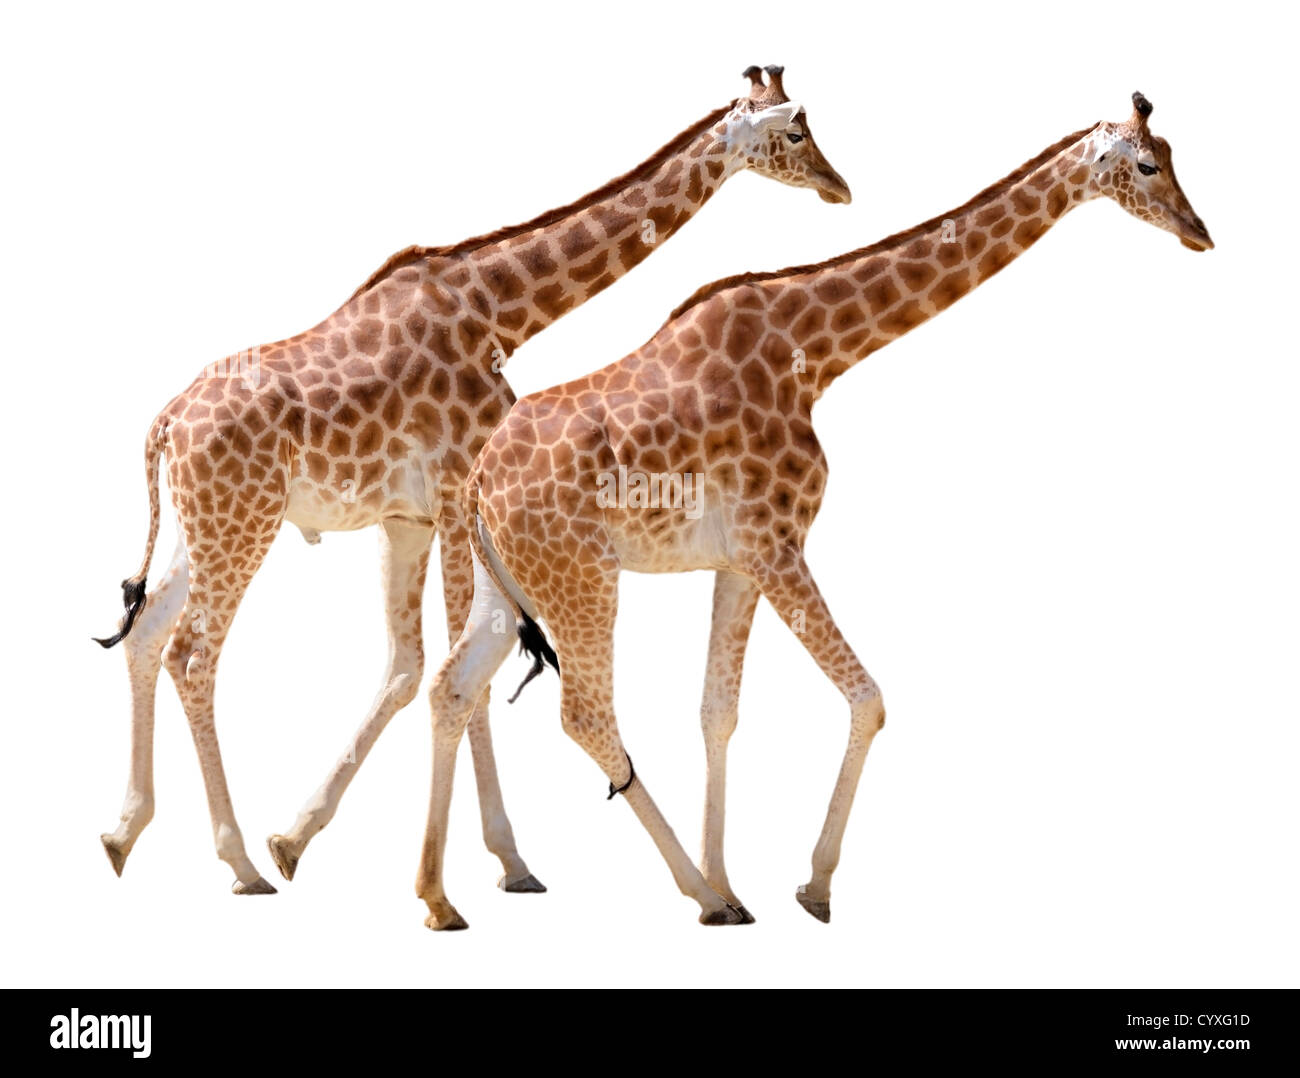 Two giraffes (Giraffa camelopardalis) walking in isolated on white background Stock Photo